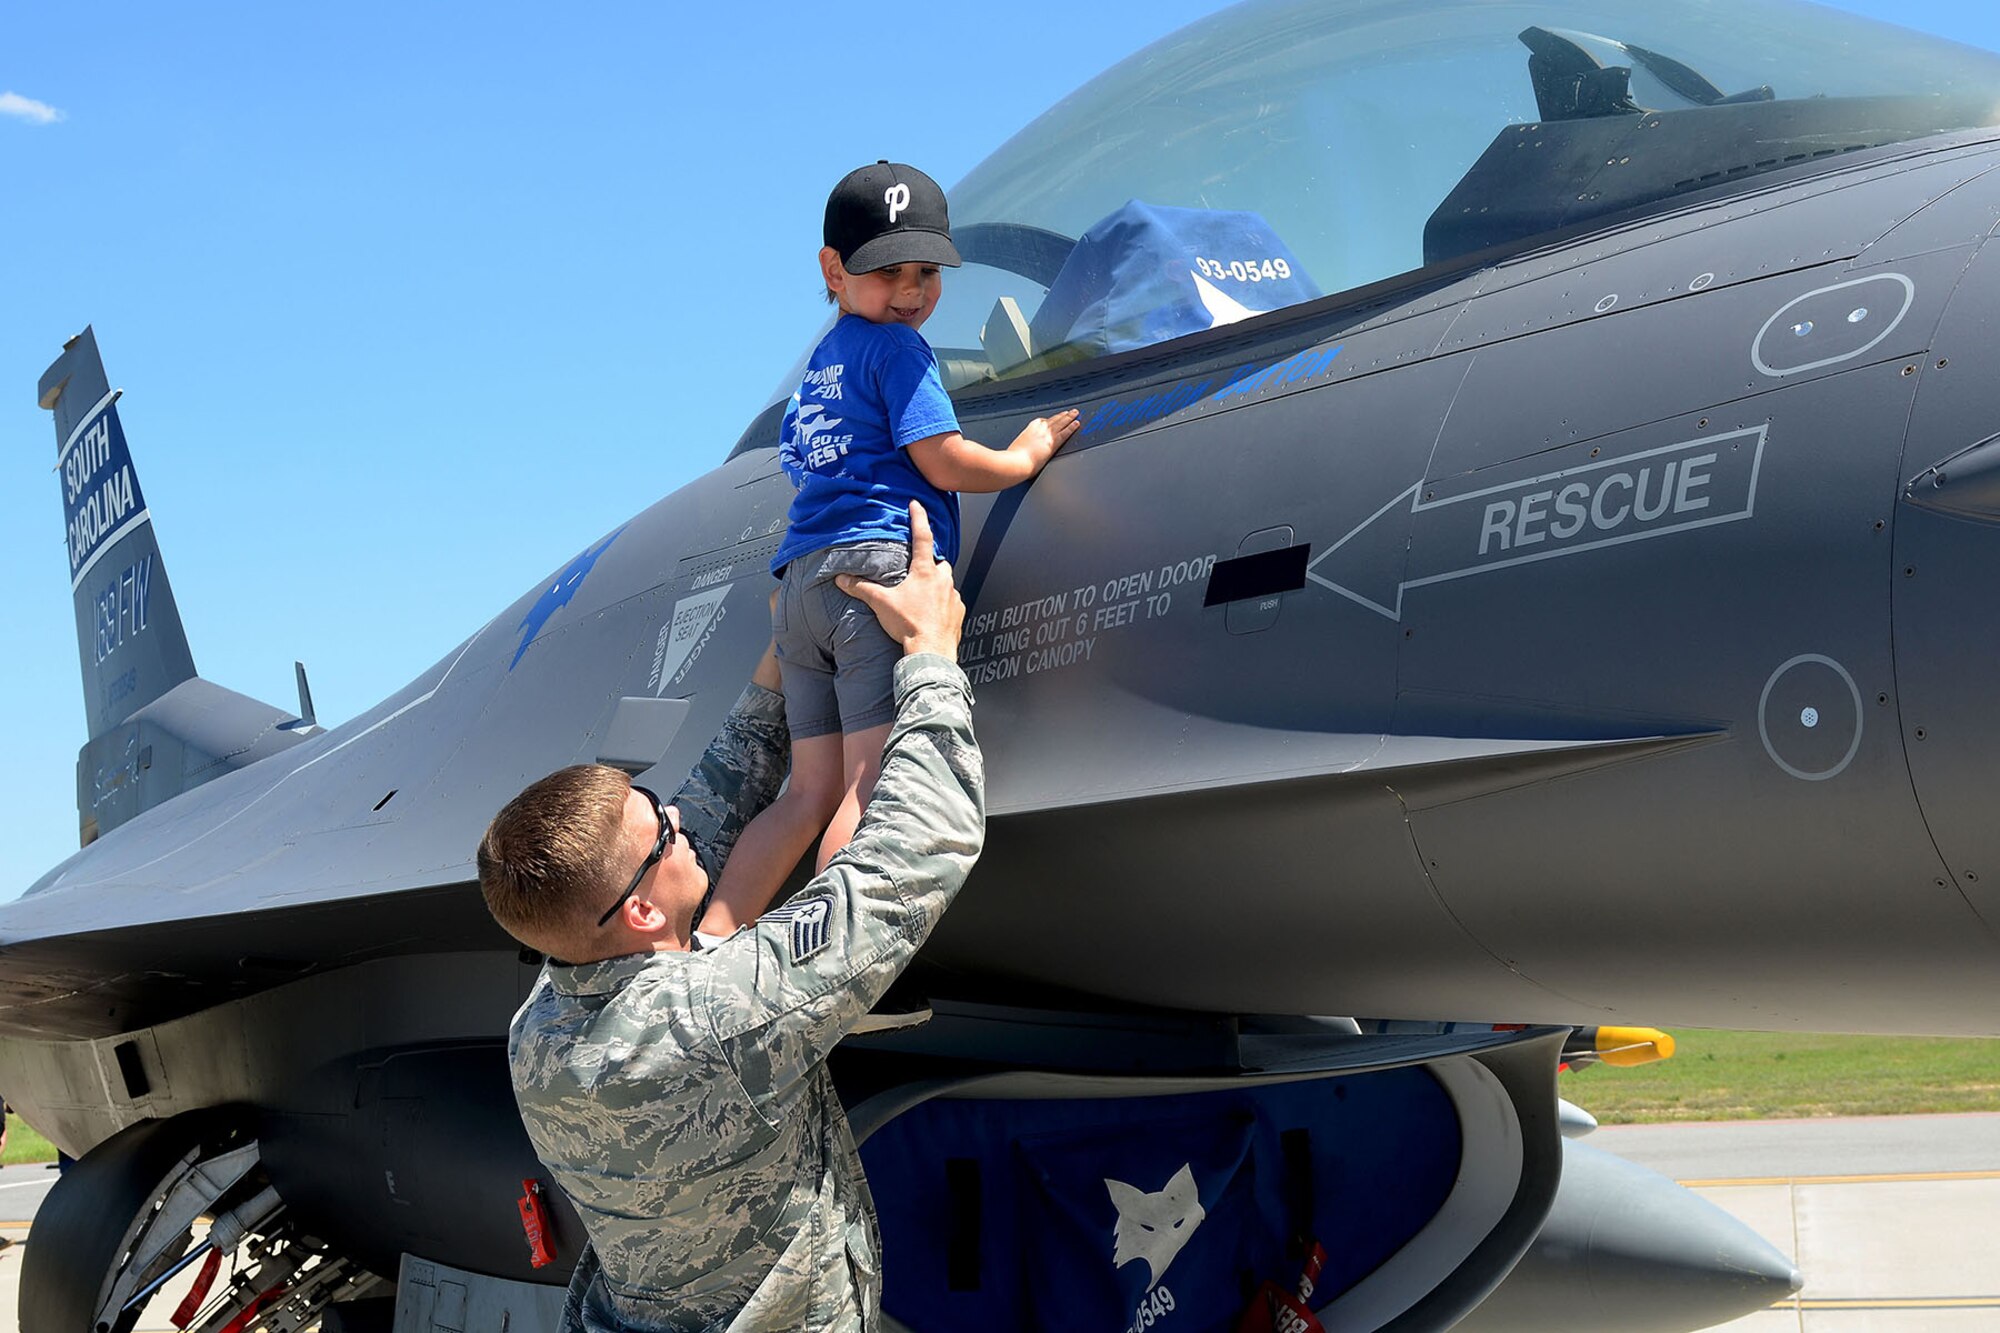 Swamp Fox Airmen and families gather during the 169th Fighter Wing Family Day for fun and fellowship at McEntire Joint National Guard Base, S.C., May 14, 2016. Local businesses and base support programs provided food and event activities to show their appreciation for the continued service of South Carolina Air National Guard and 169th Fighter Wing families and Airmen. (U.S. Air National Guard photo by Tech. Sgt. Caycee Watson)